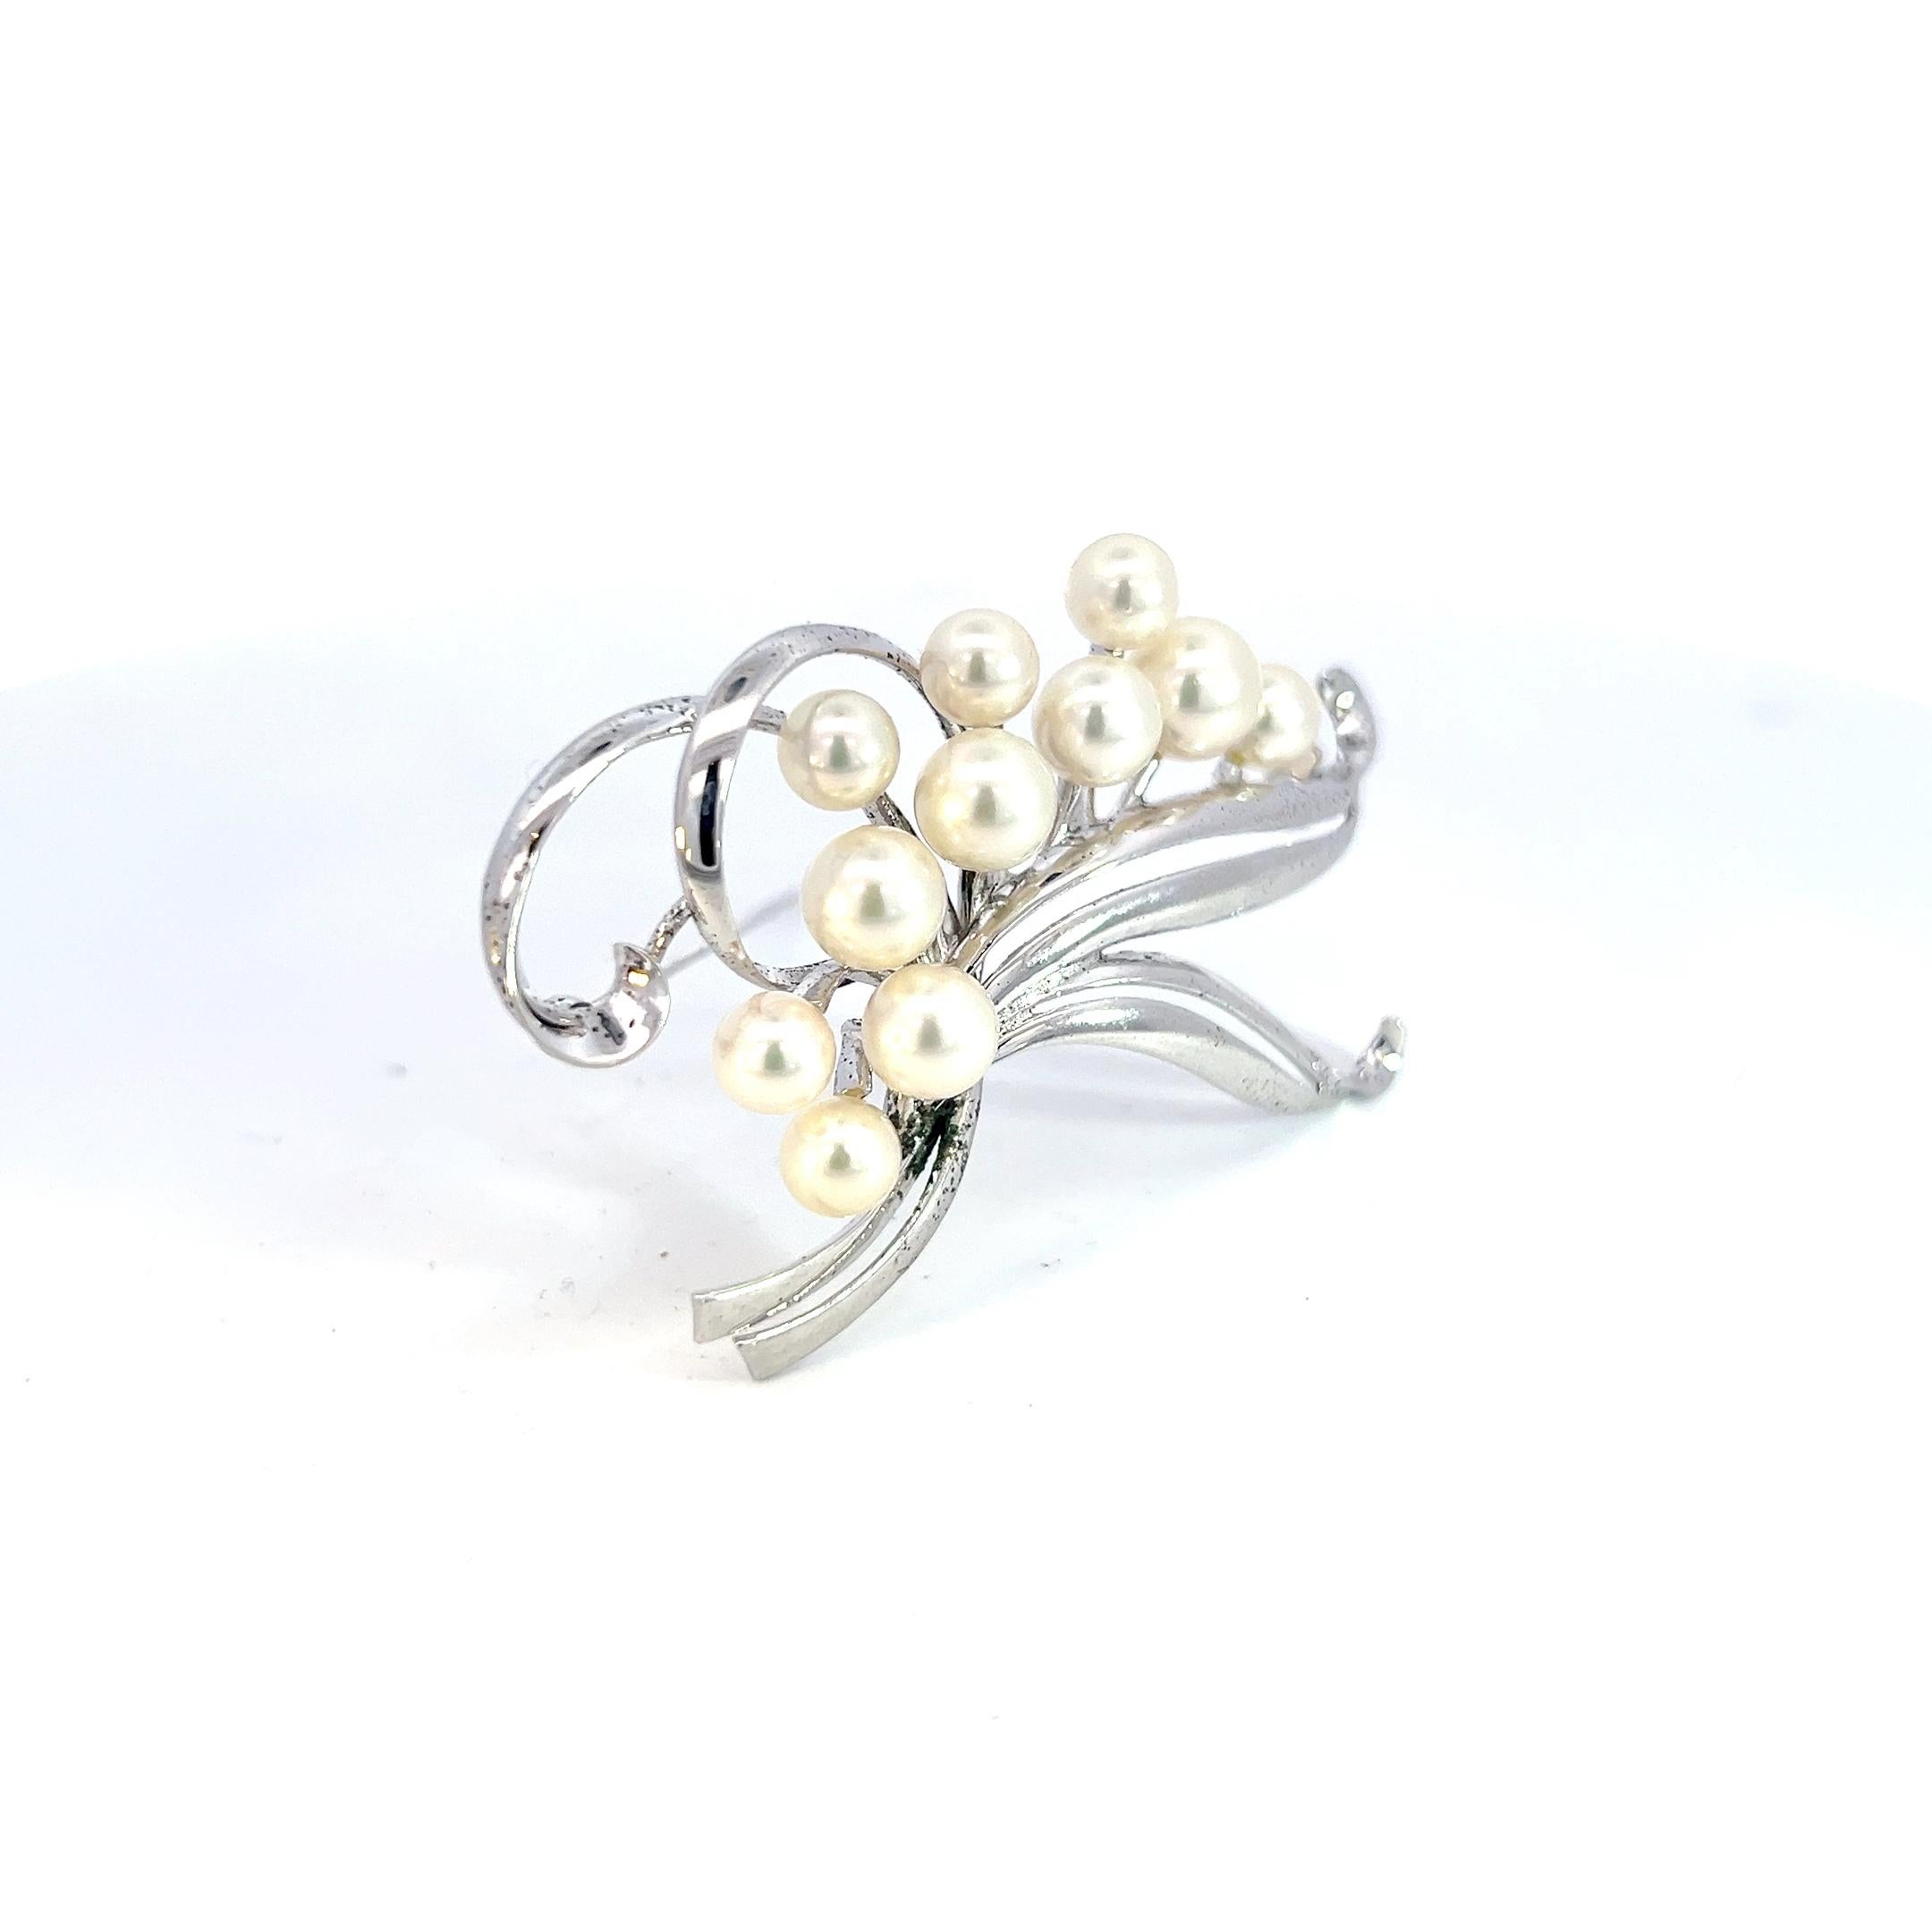 Mikimoto Estate Akoya Pearl Brooch 5.60-7.30 mm Silver M375

This elegant Authentic Mikimoto Silver brooch has 11 Saltwater Akoya Cultured Pearls size is 5.60-7.30 mm and a weight of 11.2 grams.

TRUSTED SELLER SINCE 2002

PLEASE SEE OUR HUNDREDS OF